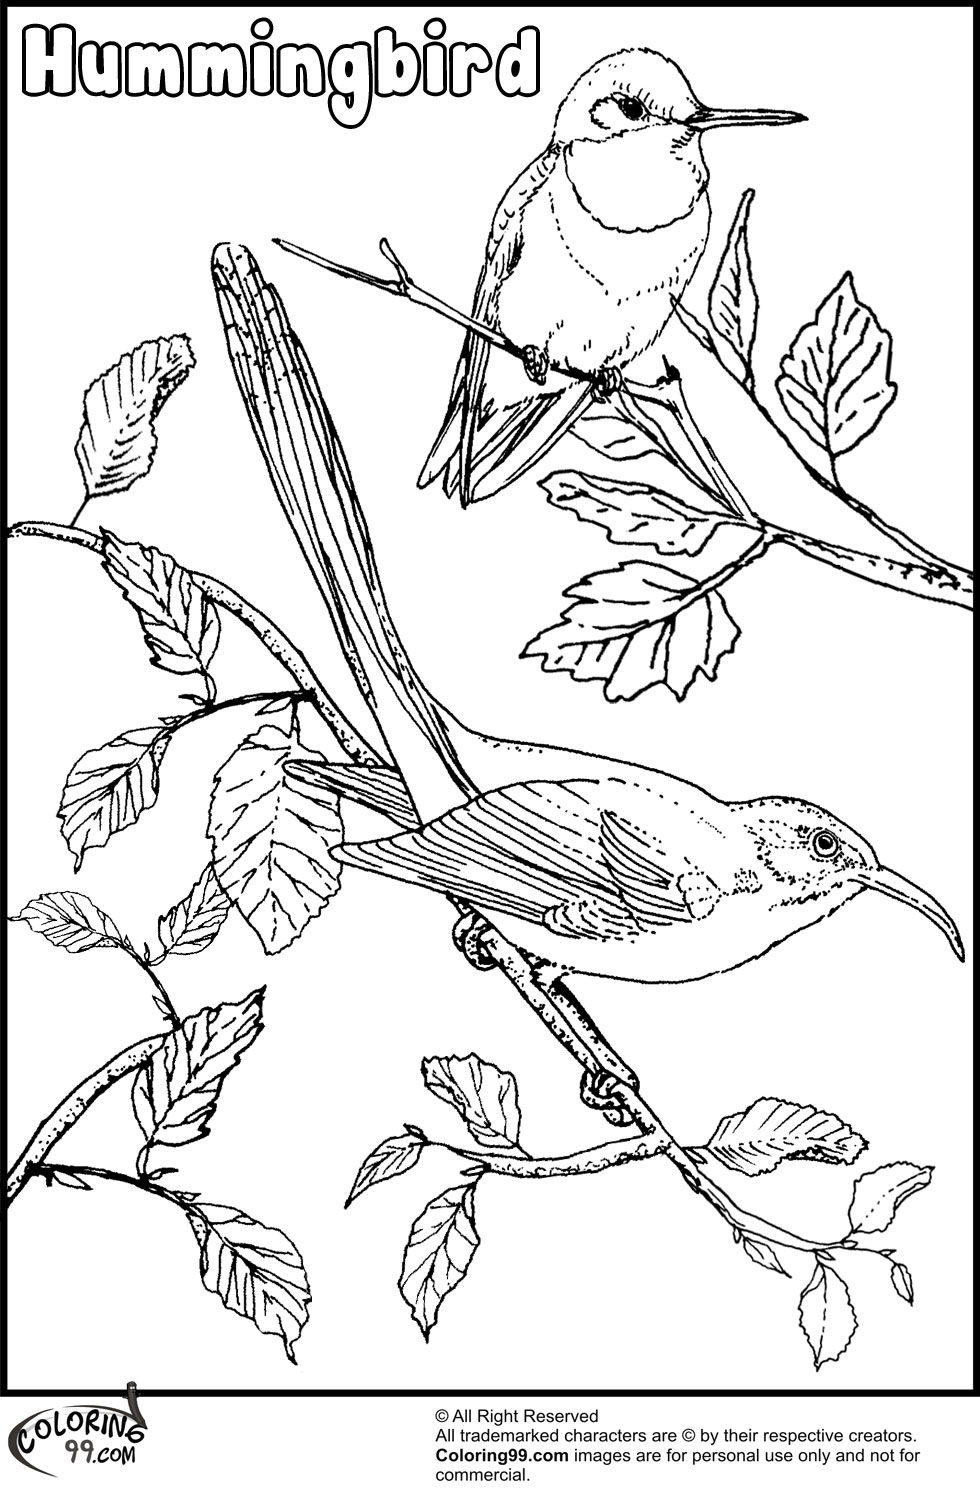 Hummingbird Coloring Pages | Minister Coloring